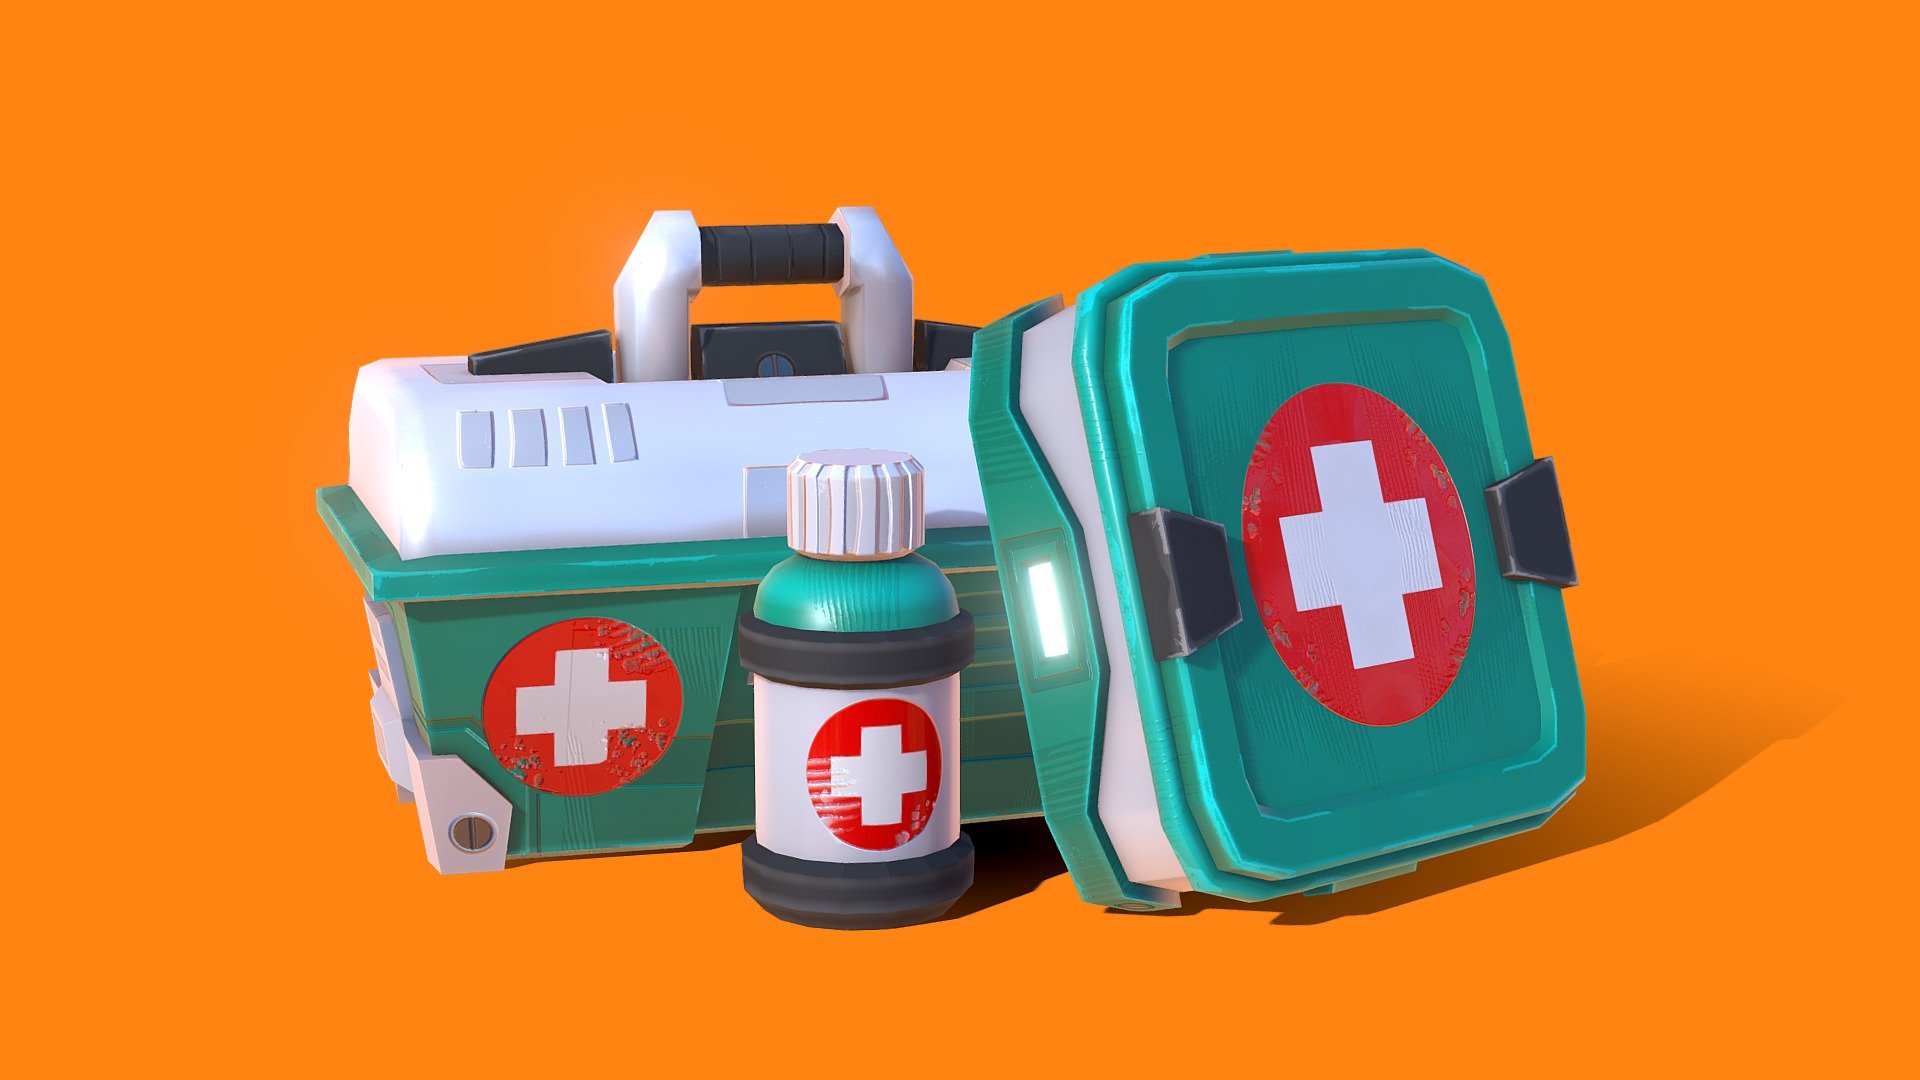 Everyone liked to picture Overwatch as a TF2 clone back in the days. So I decided to reversed it and remade original TF2 props in Overwatch style. Enjoy! - TF2 health items Overwatch style rework - 3D model by Pavel Arkhipov (@dremmer8) 3d model